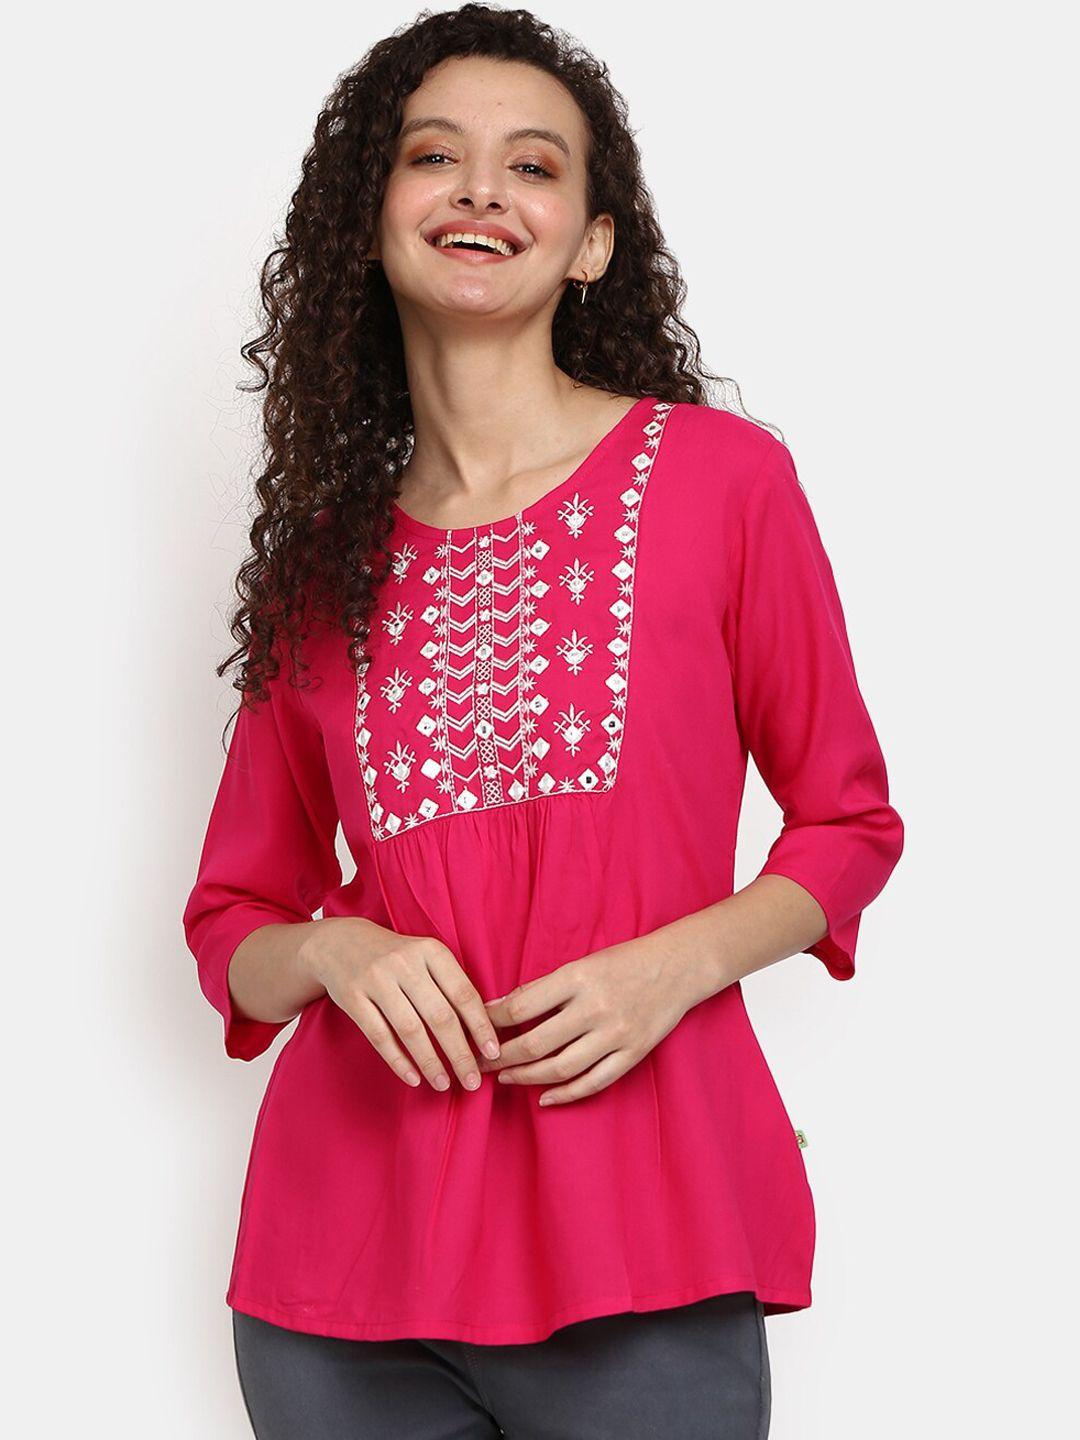 v-mart women pink embroidered poly cotton round neck top